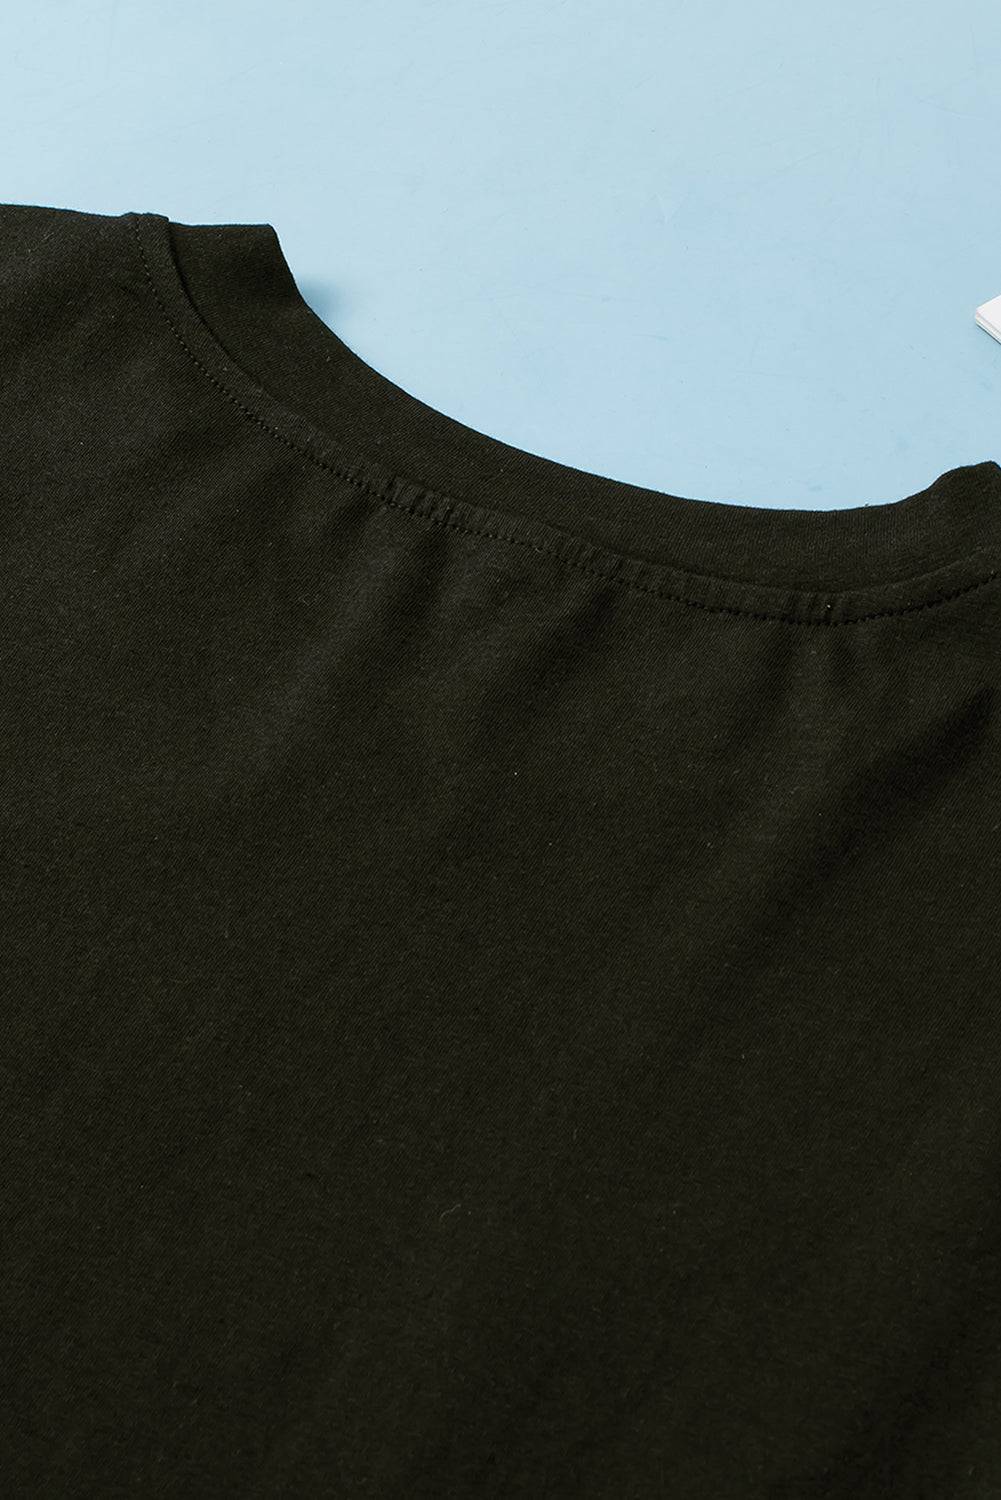 a black t - shirt laying on top of a blue surface